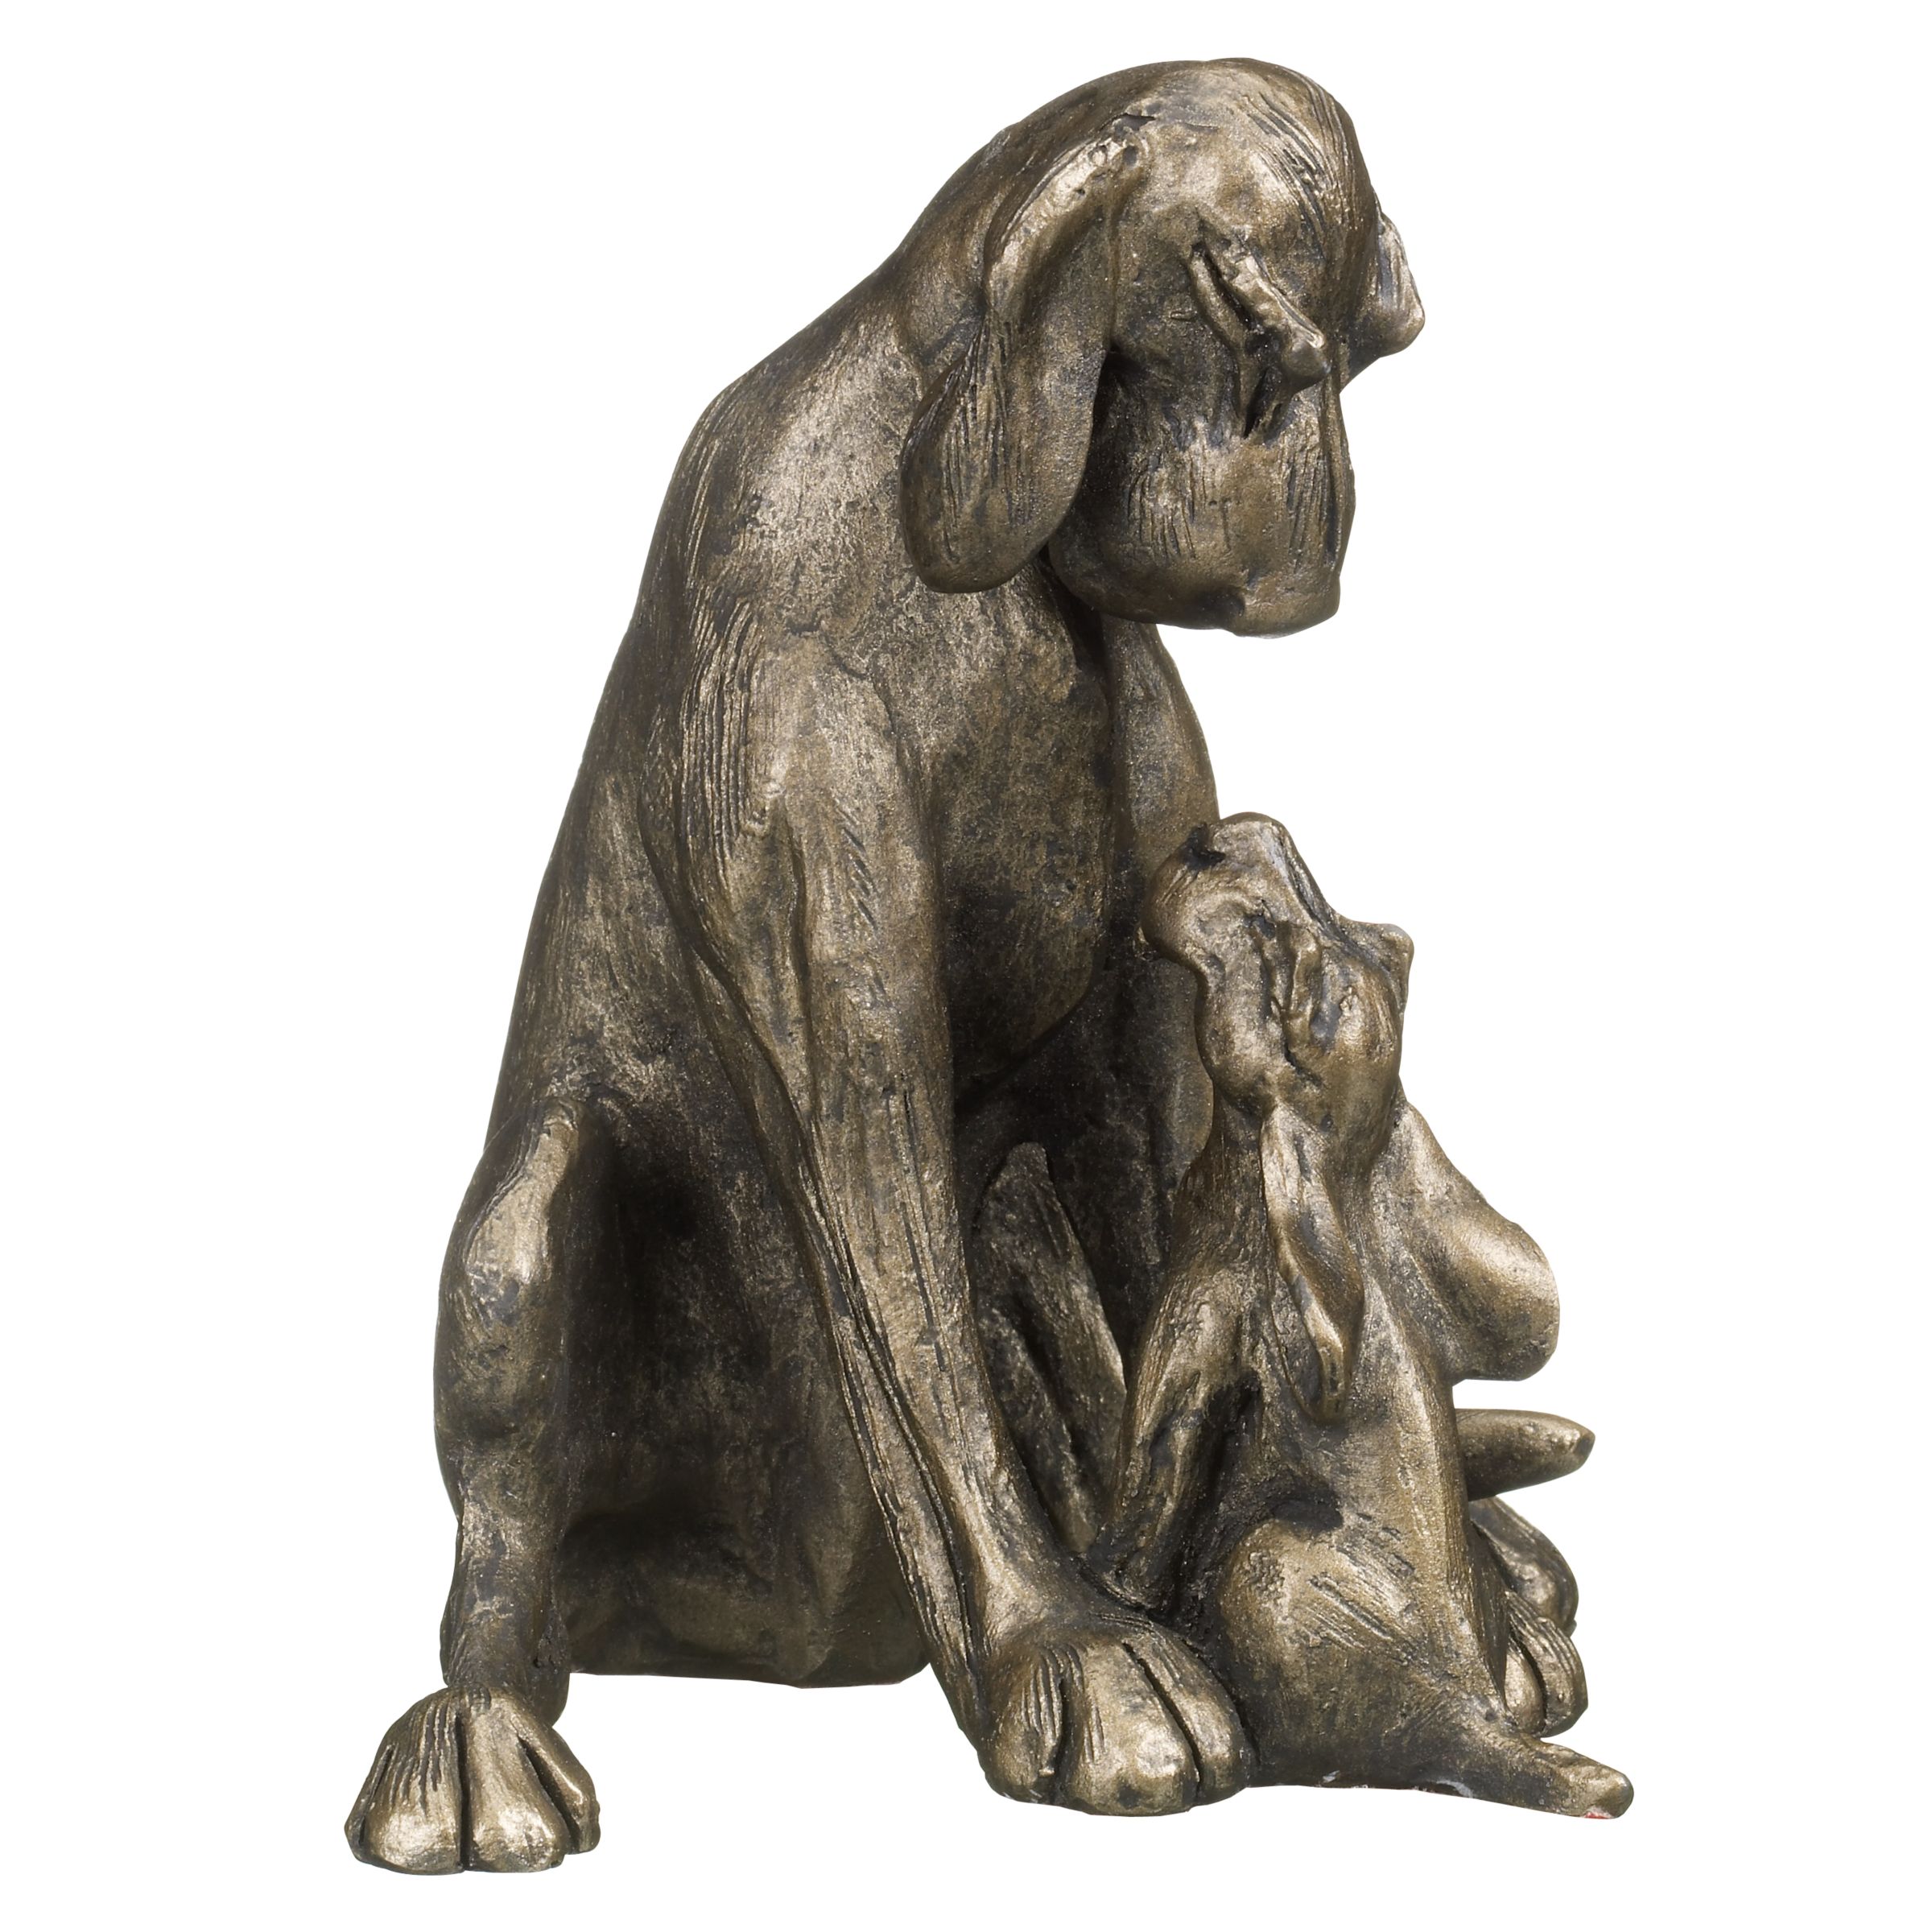 Frith Sculpture Amber and Pup, by Harriet Dunn